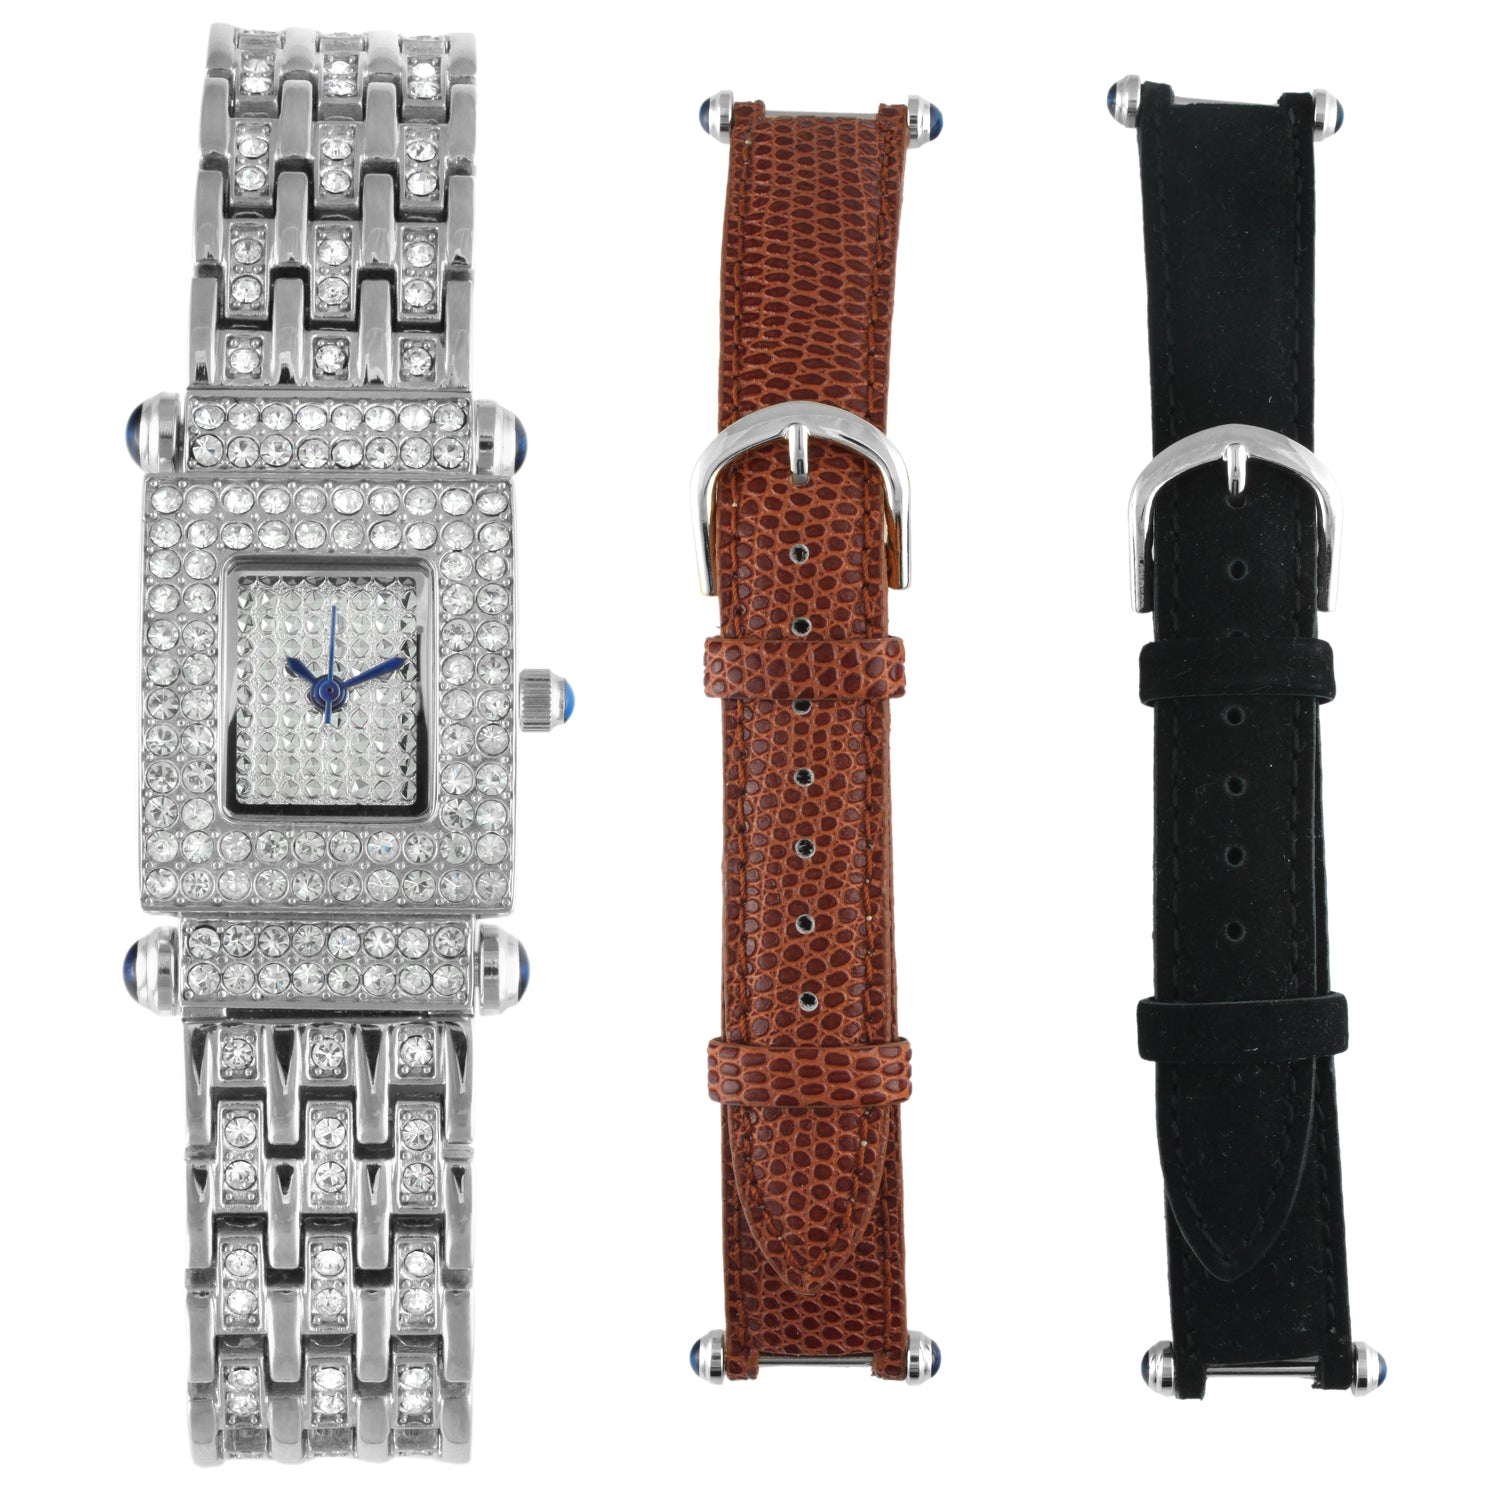 Women's Interchangeable Strap Crystal Pave Dial Gift Set - Peugeot Watches